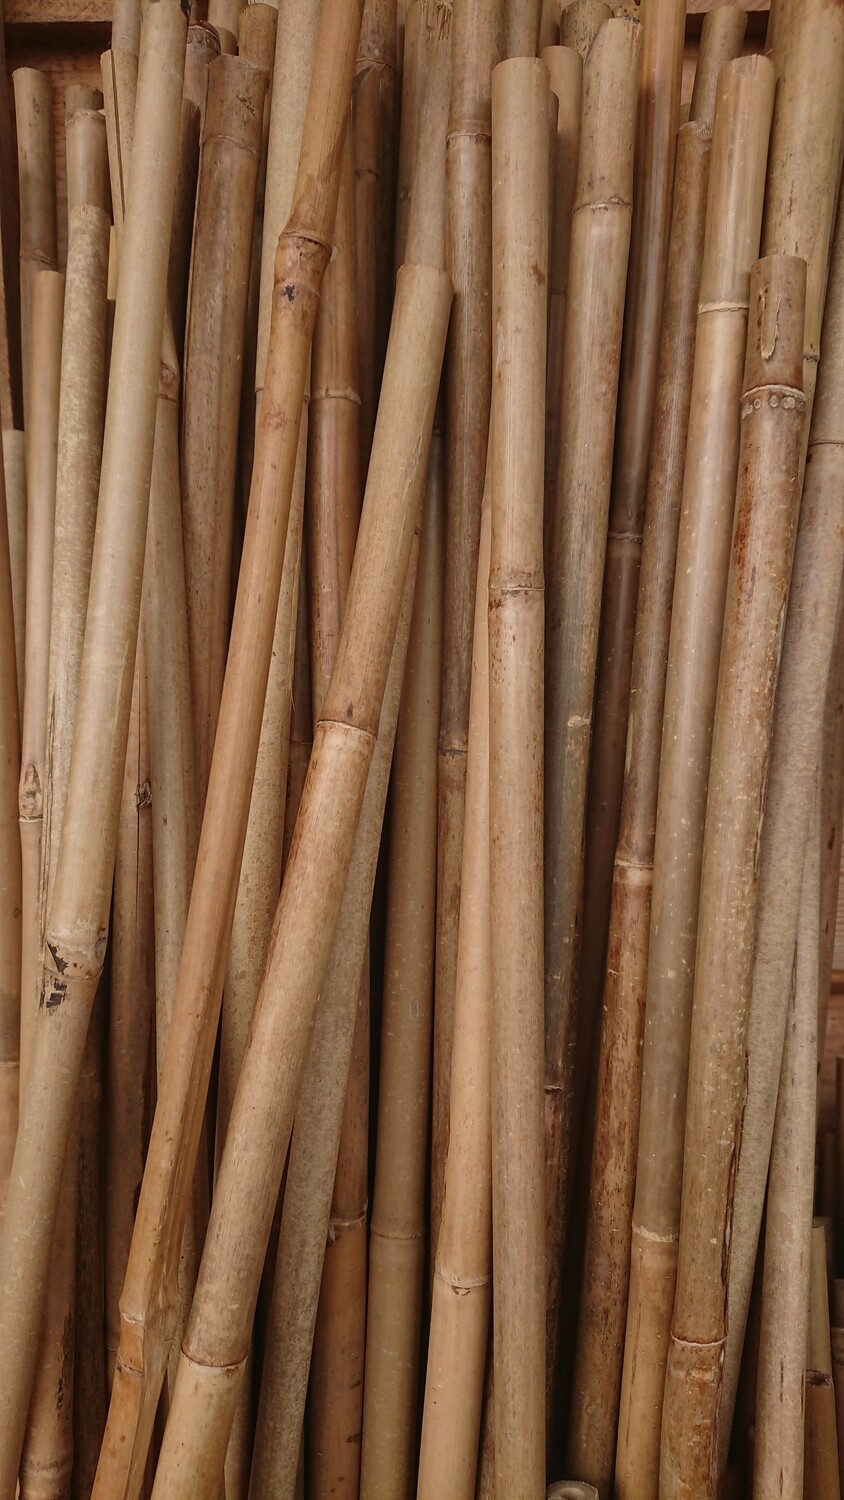 Bamboo canes 5ft